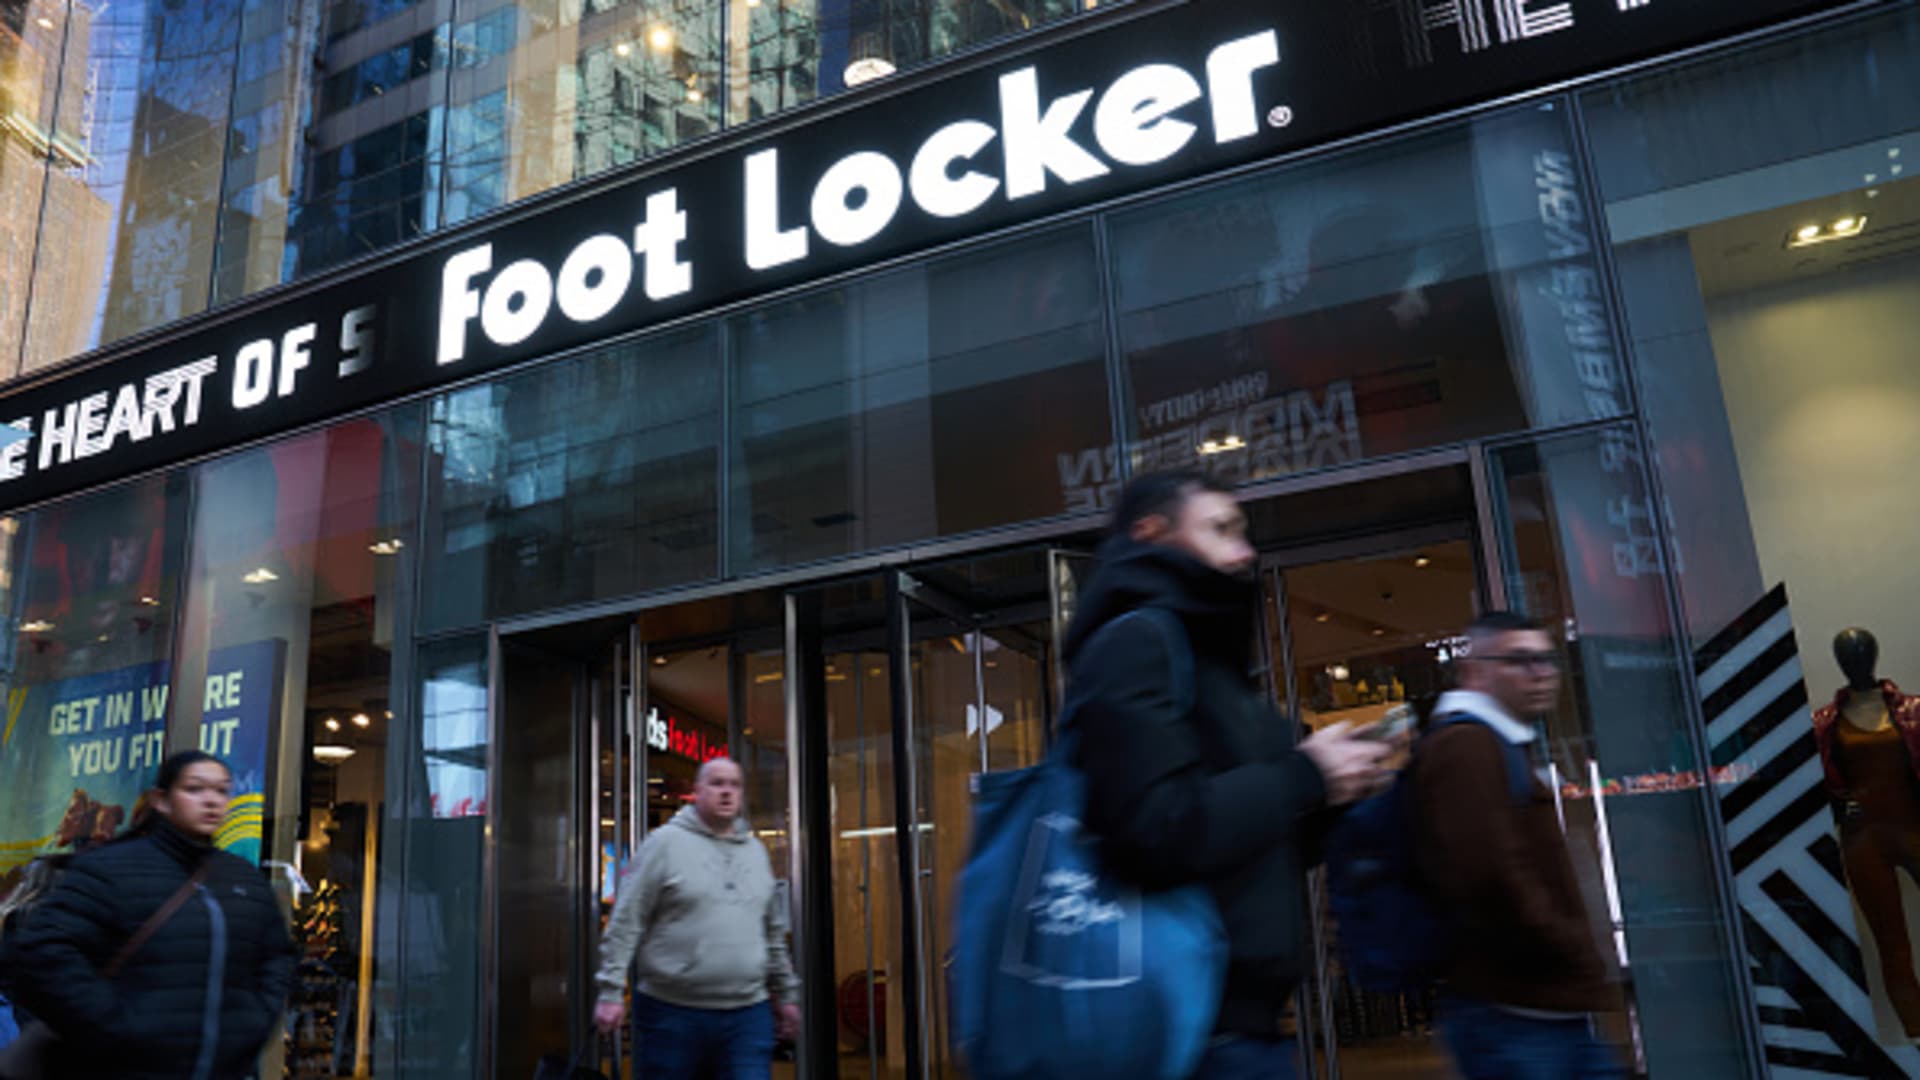 Foot Locker shares rise as retailer posts earnings beat, gives more upbeat sales outlook